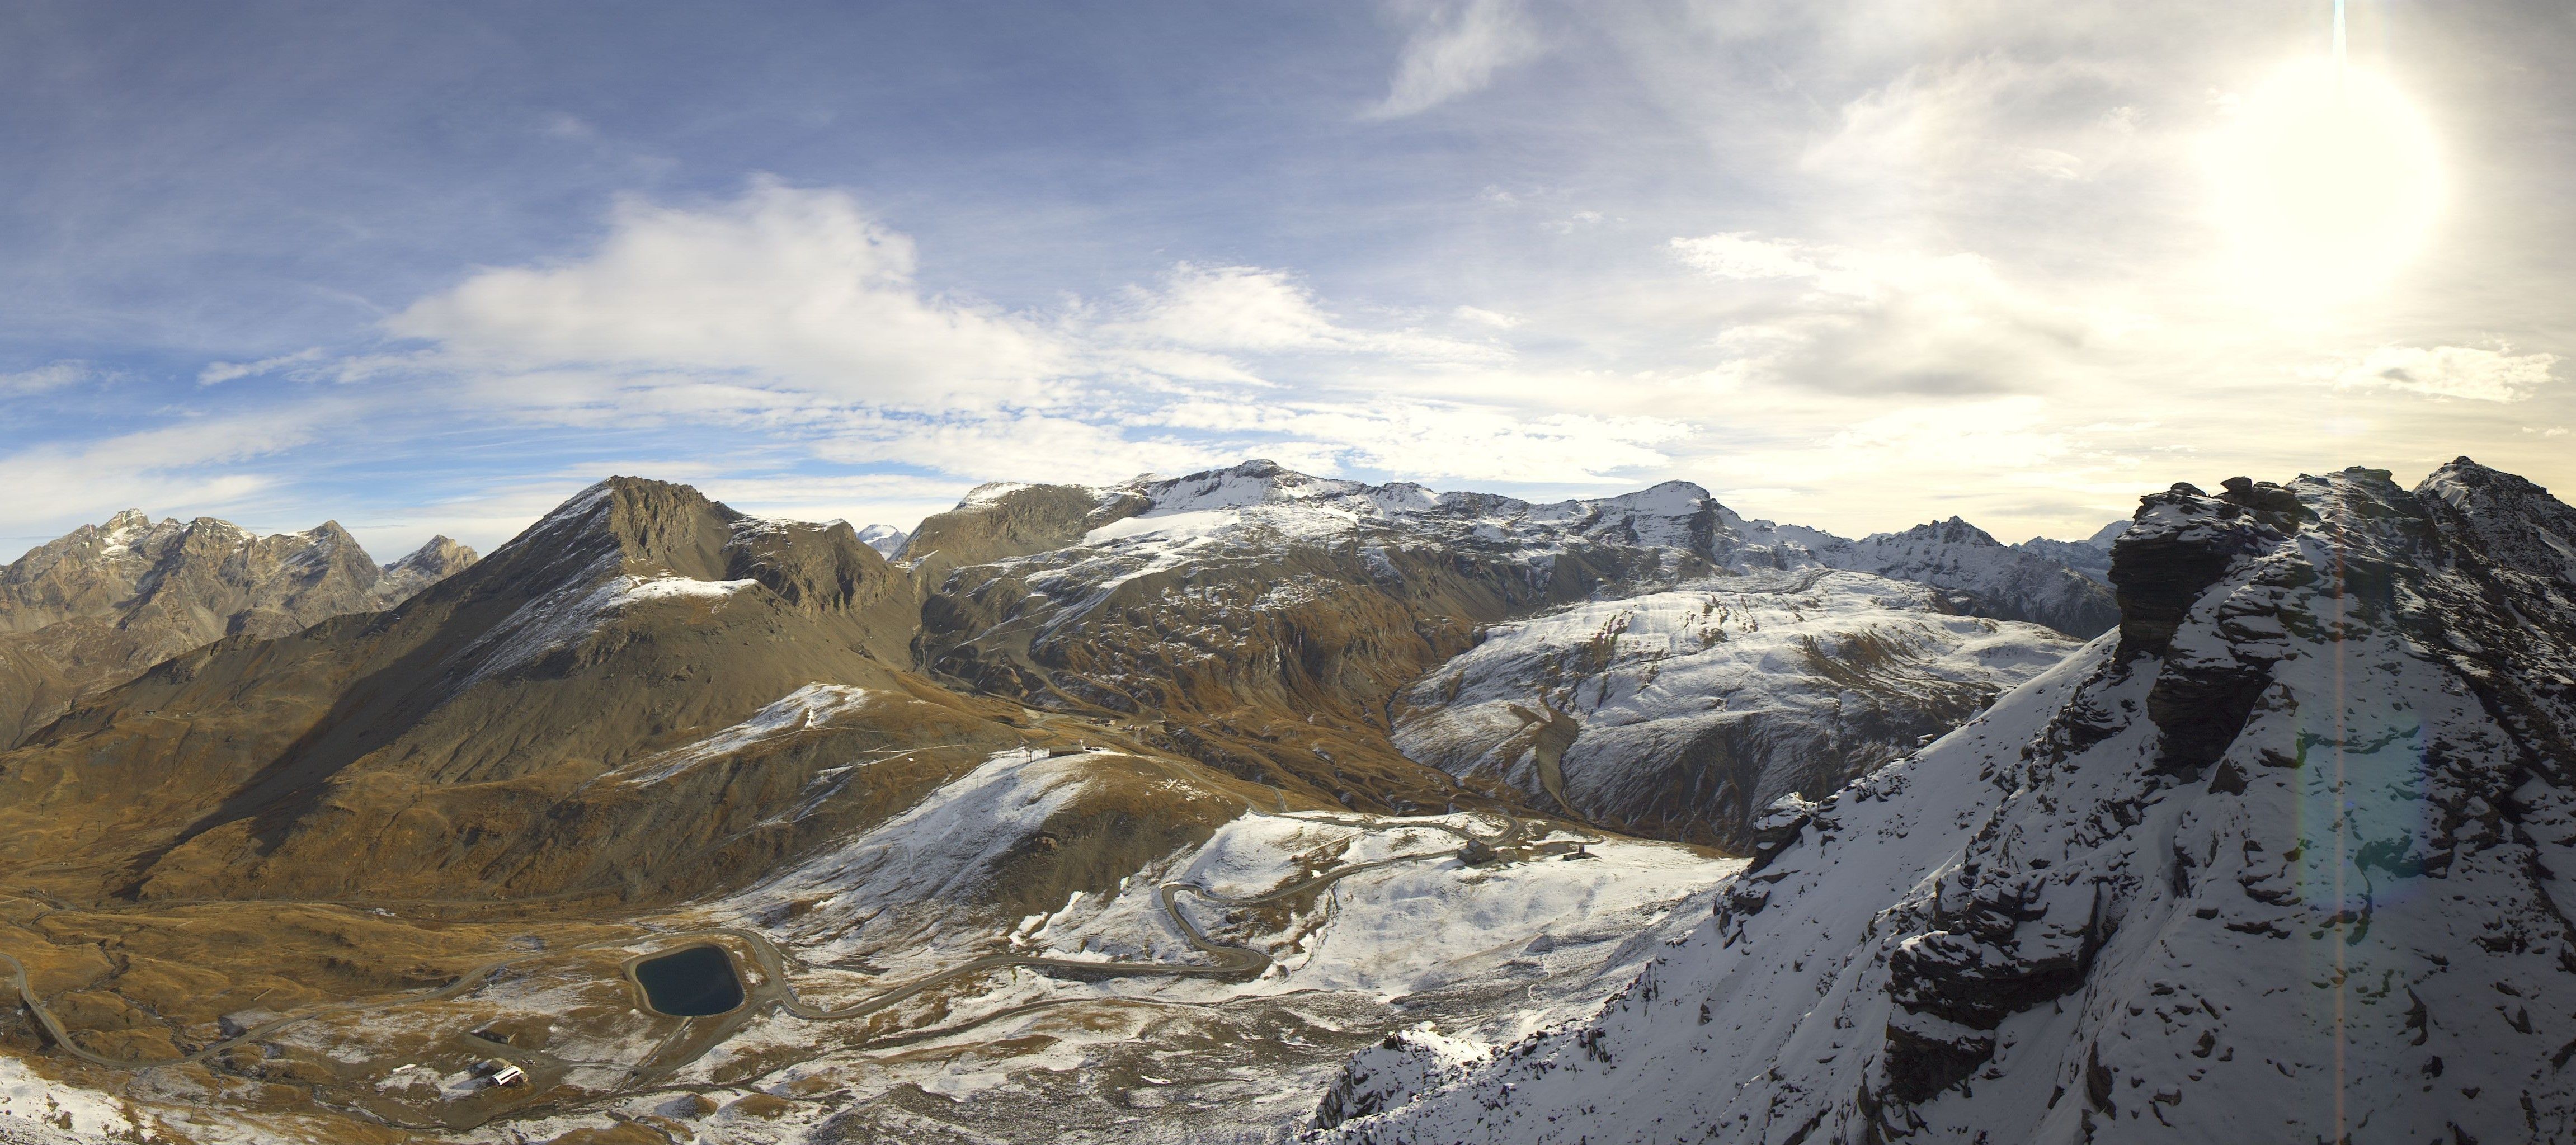 Also in Val d'Isère it is still dry, but within a couple of hours the first snow will start to fall here (roundshot.com)